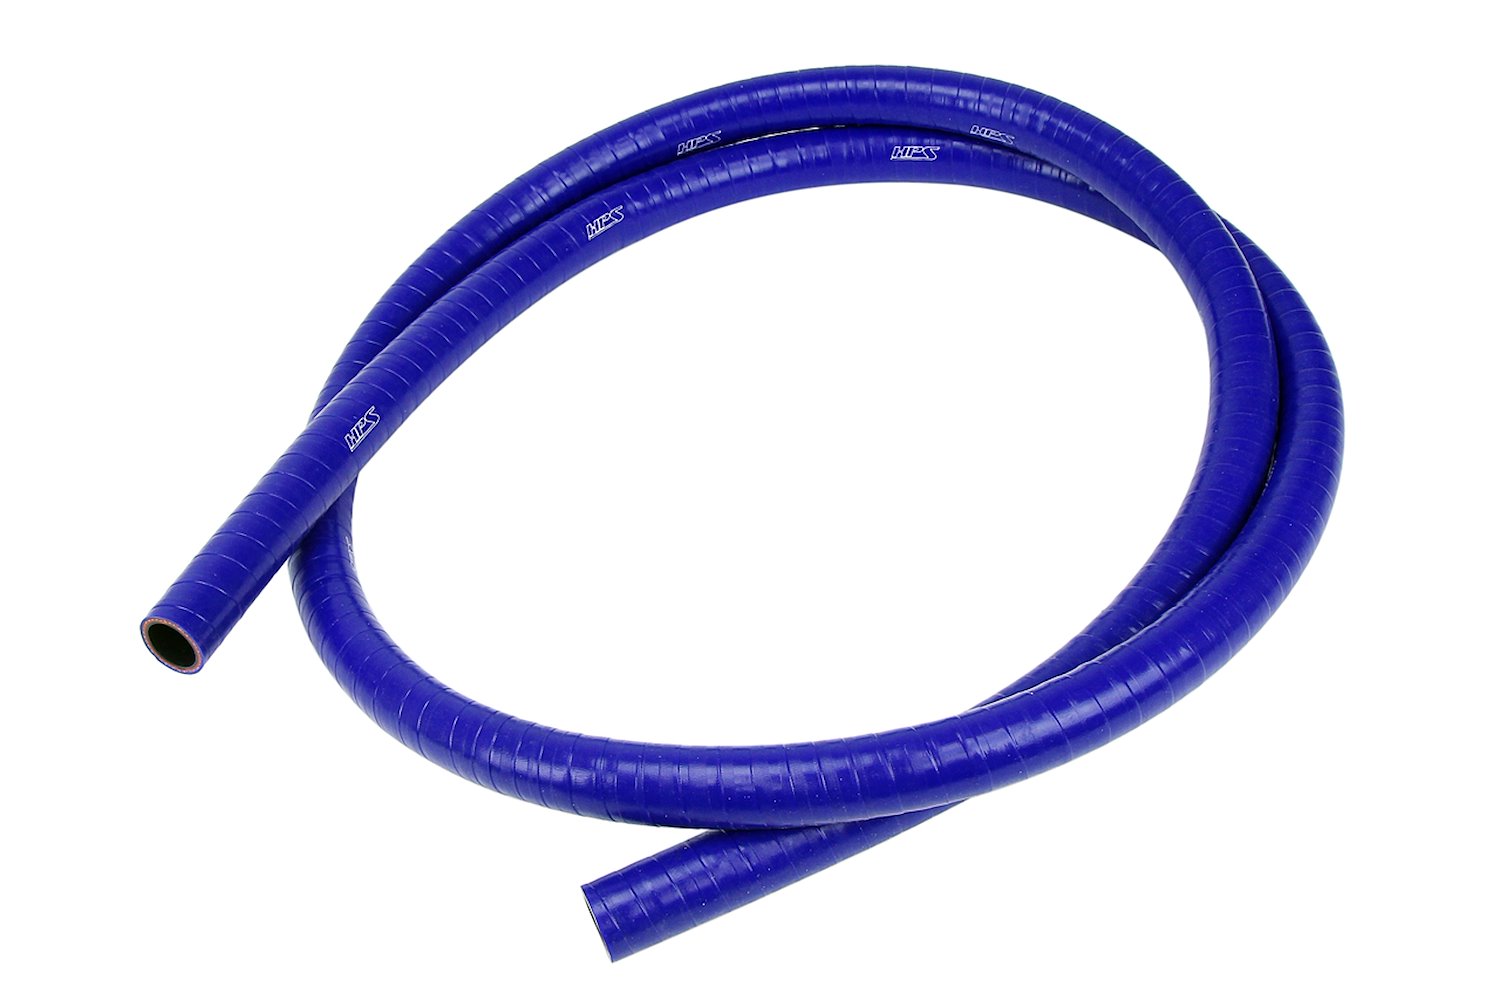 FKM-2F-025-BLUE FKM Silicone Hose, Silicone Oil Resistant Hose, High-Temp 1-Ply Reinforced, 1/4 in. ID, 2 ft. Long, Blue